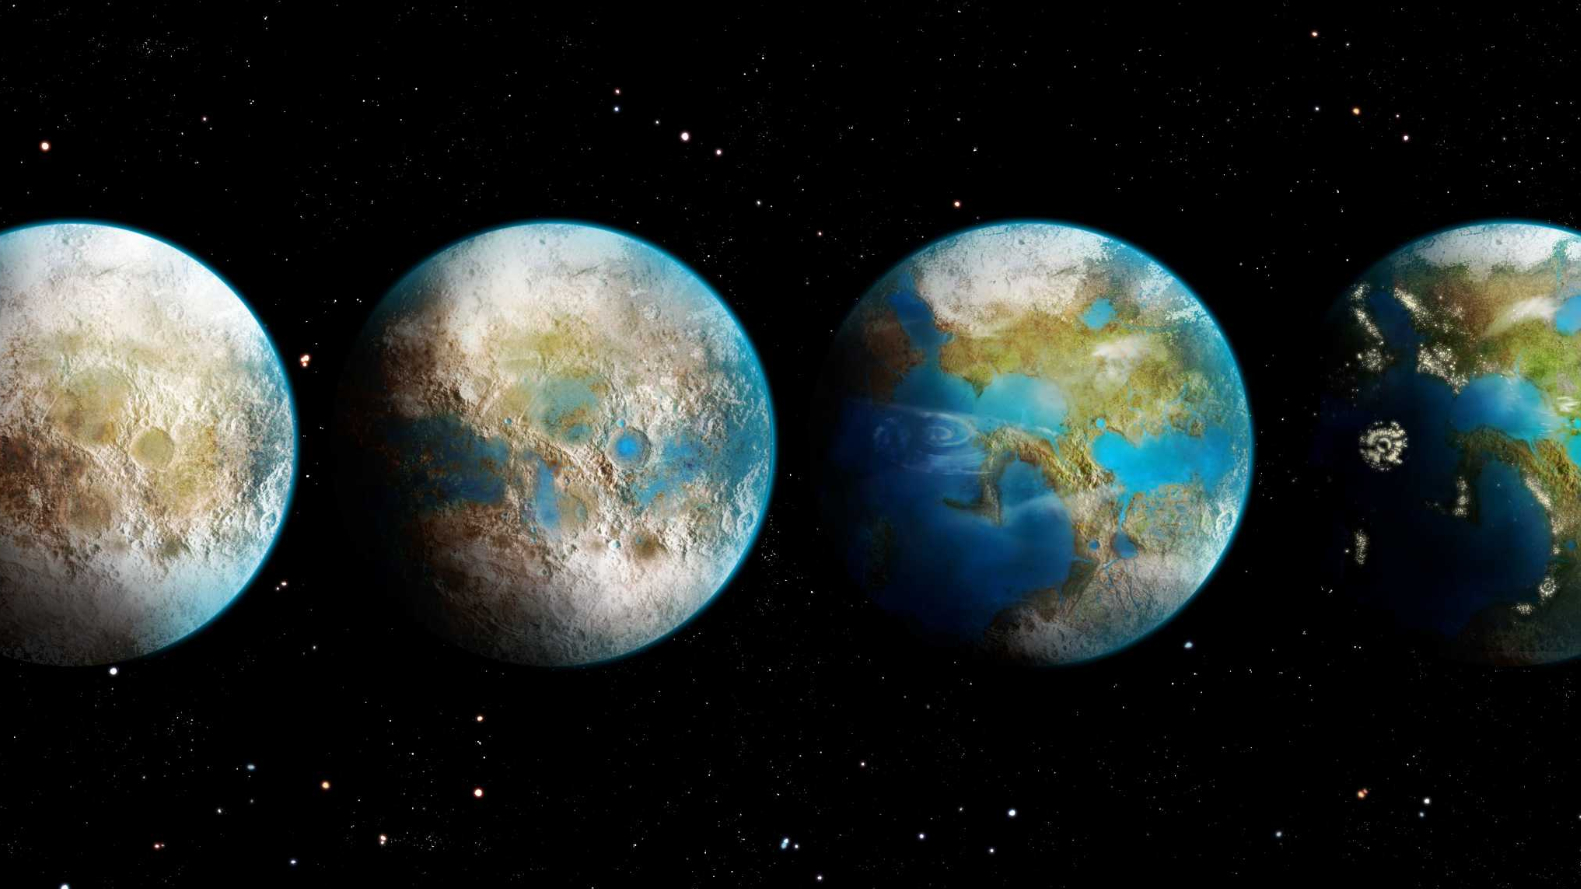 If alien terraforming emits greenhouse gases, our telescopes could detect it Space